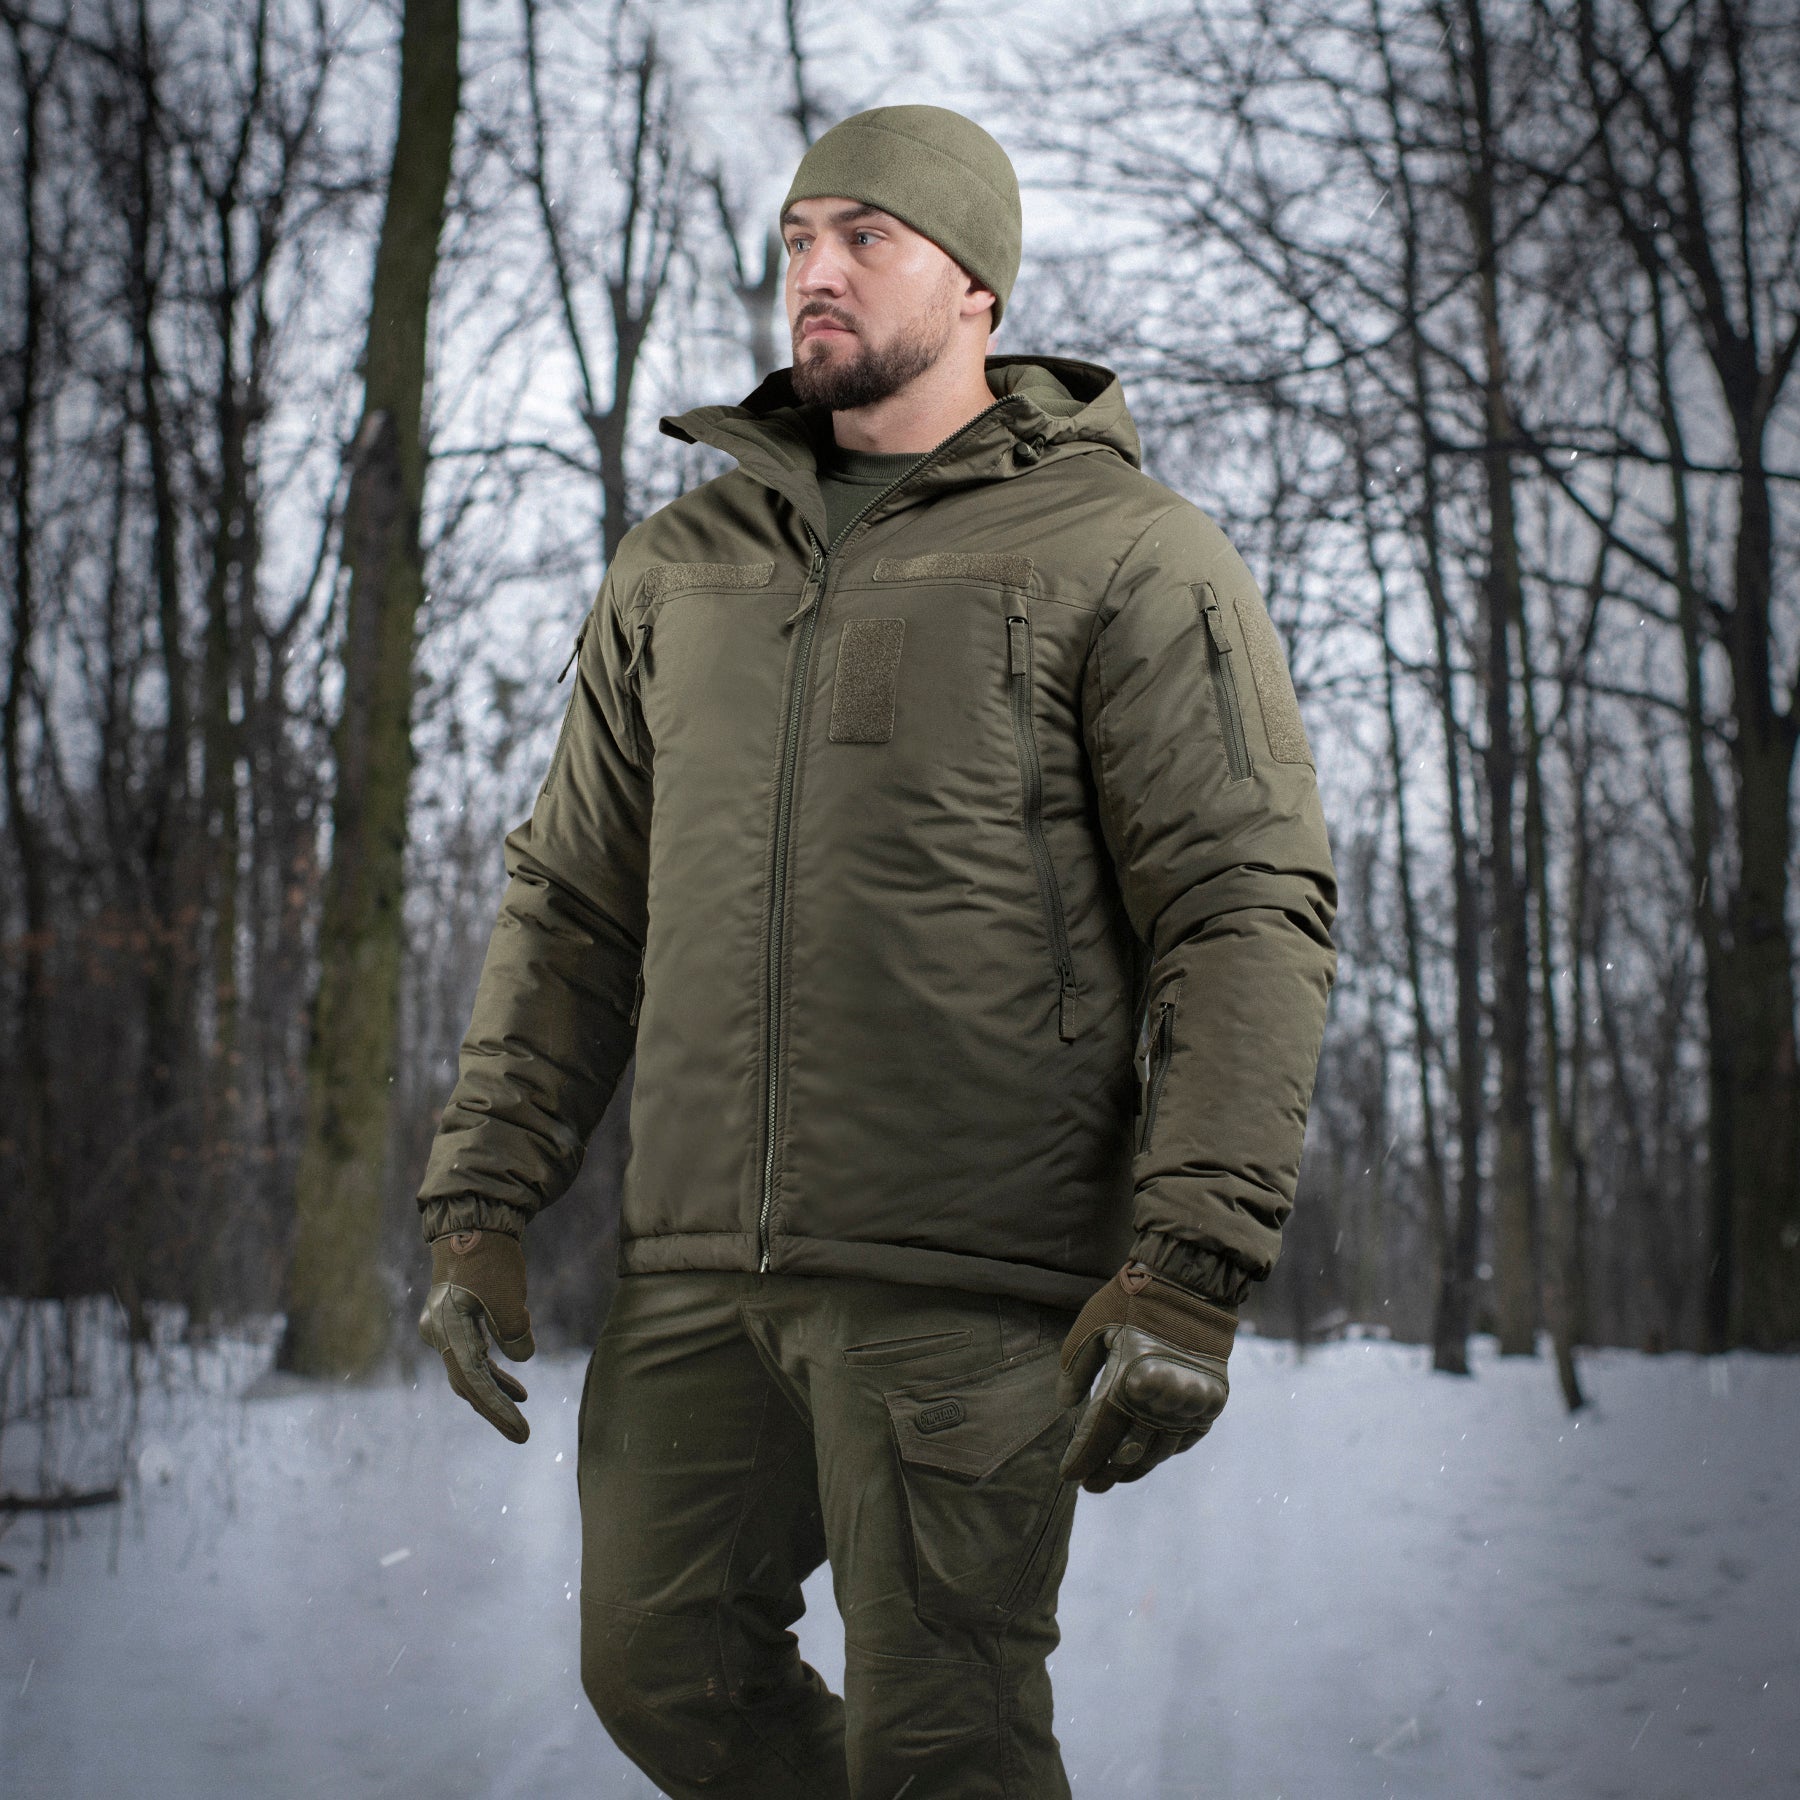 US Issue Light Weight Gen III Cold Weather Undershirt by Polartec